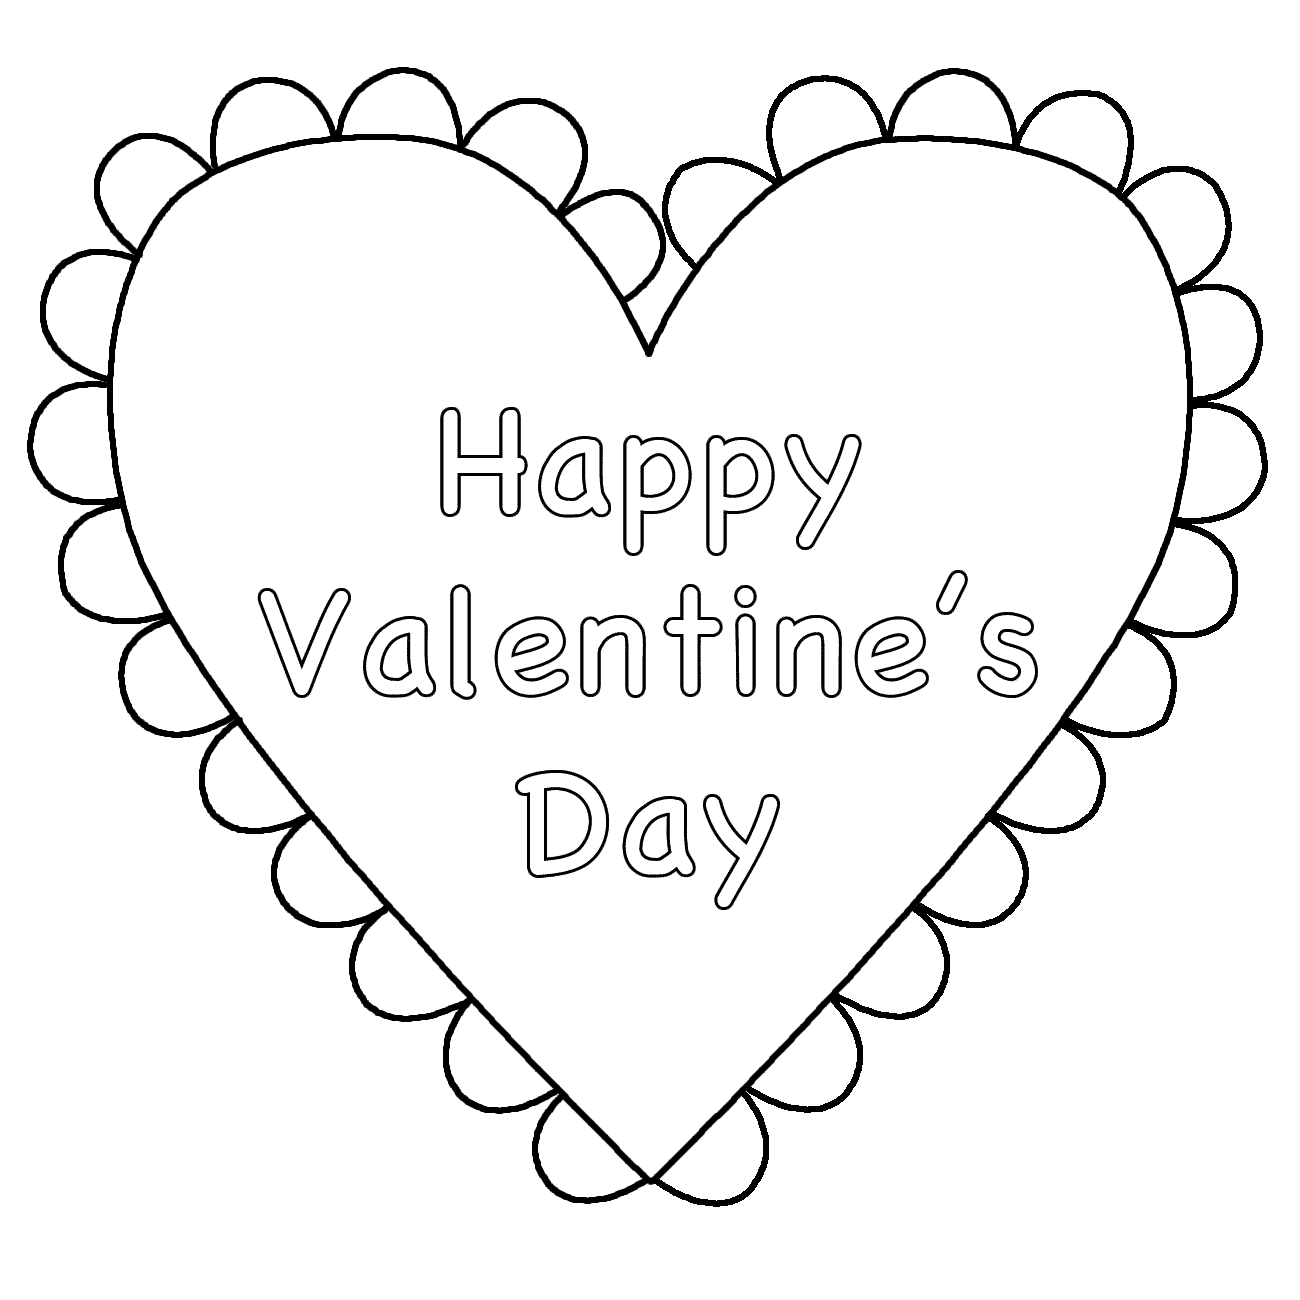 Heart (Happy Valentine's Day) - Coloring Page (Valentine's Day)